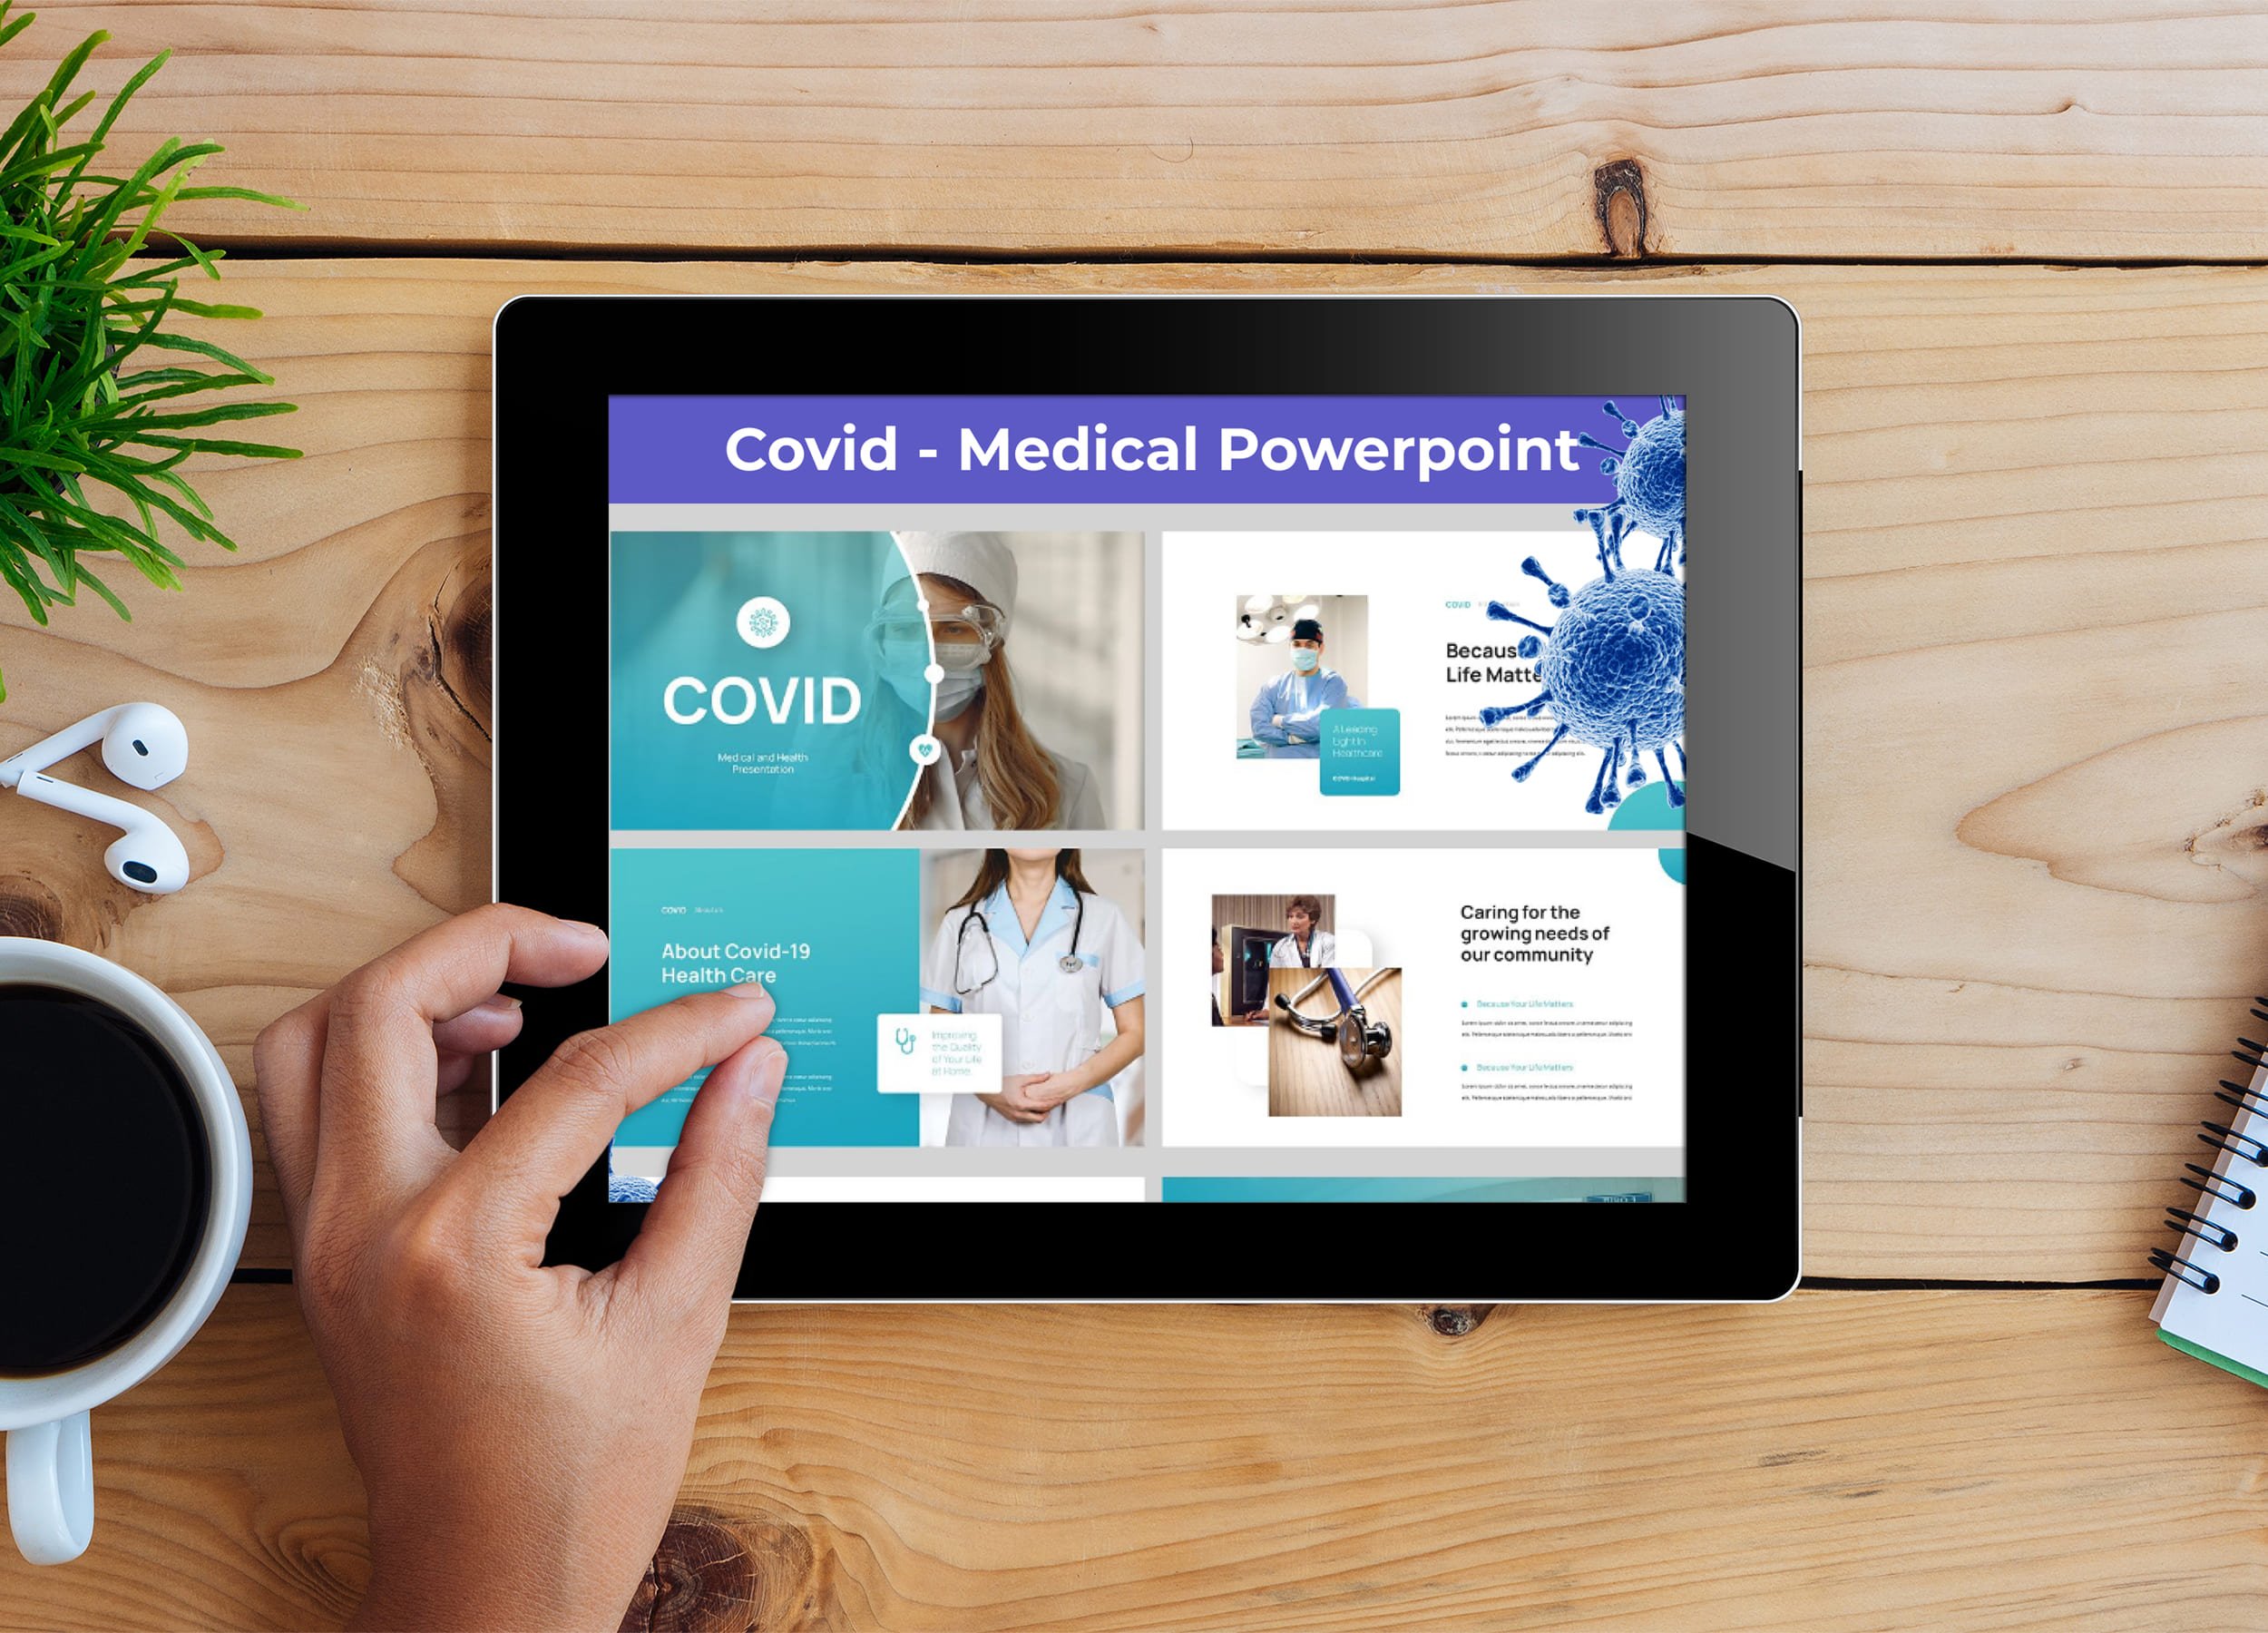 Tablet option of the Covid - Medical Powerpoint.